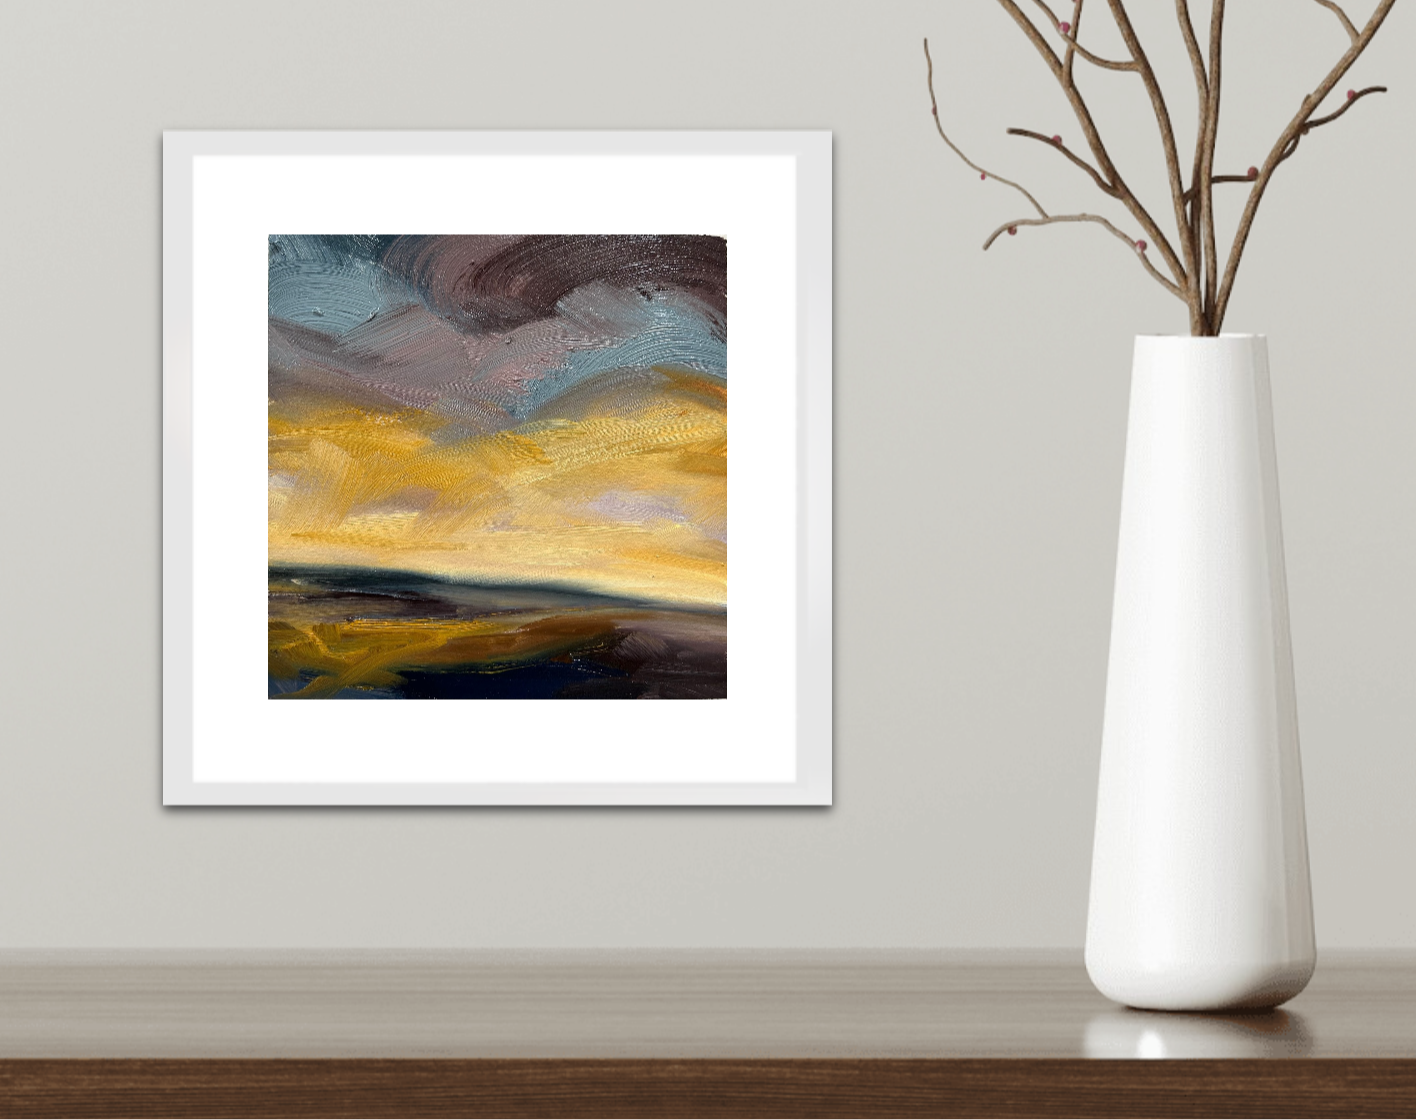 Glowing Light Original Oil On Paper Landscape Painting In Room Setting 3